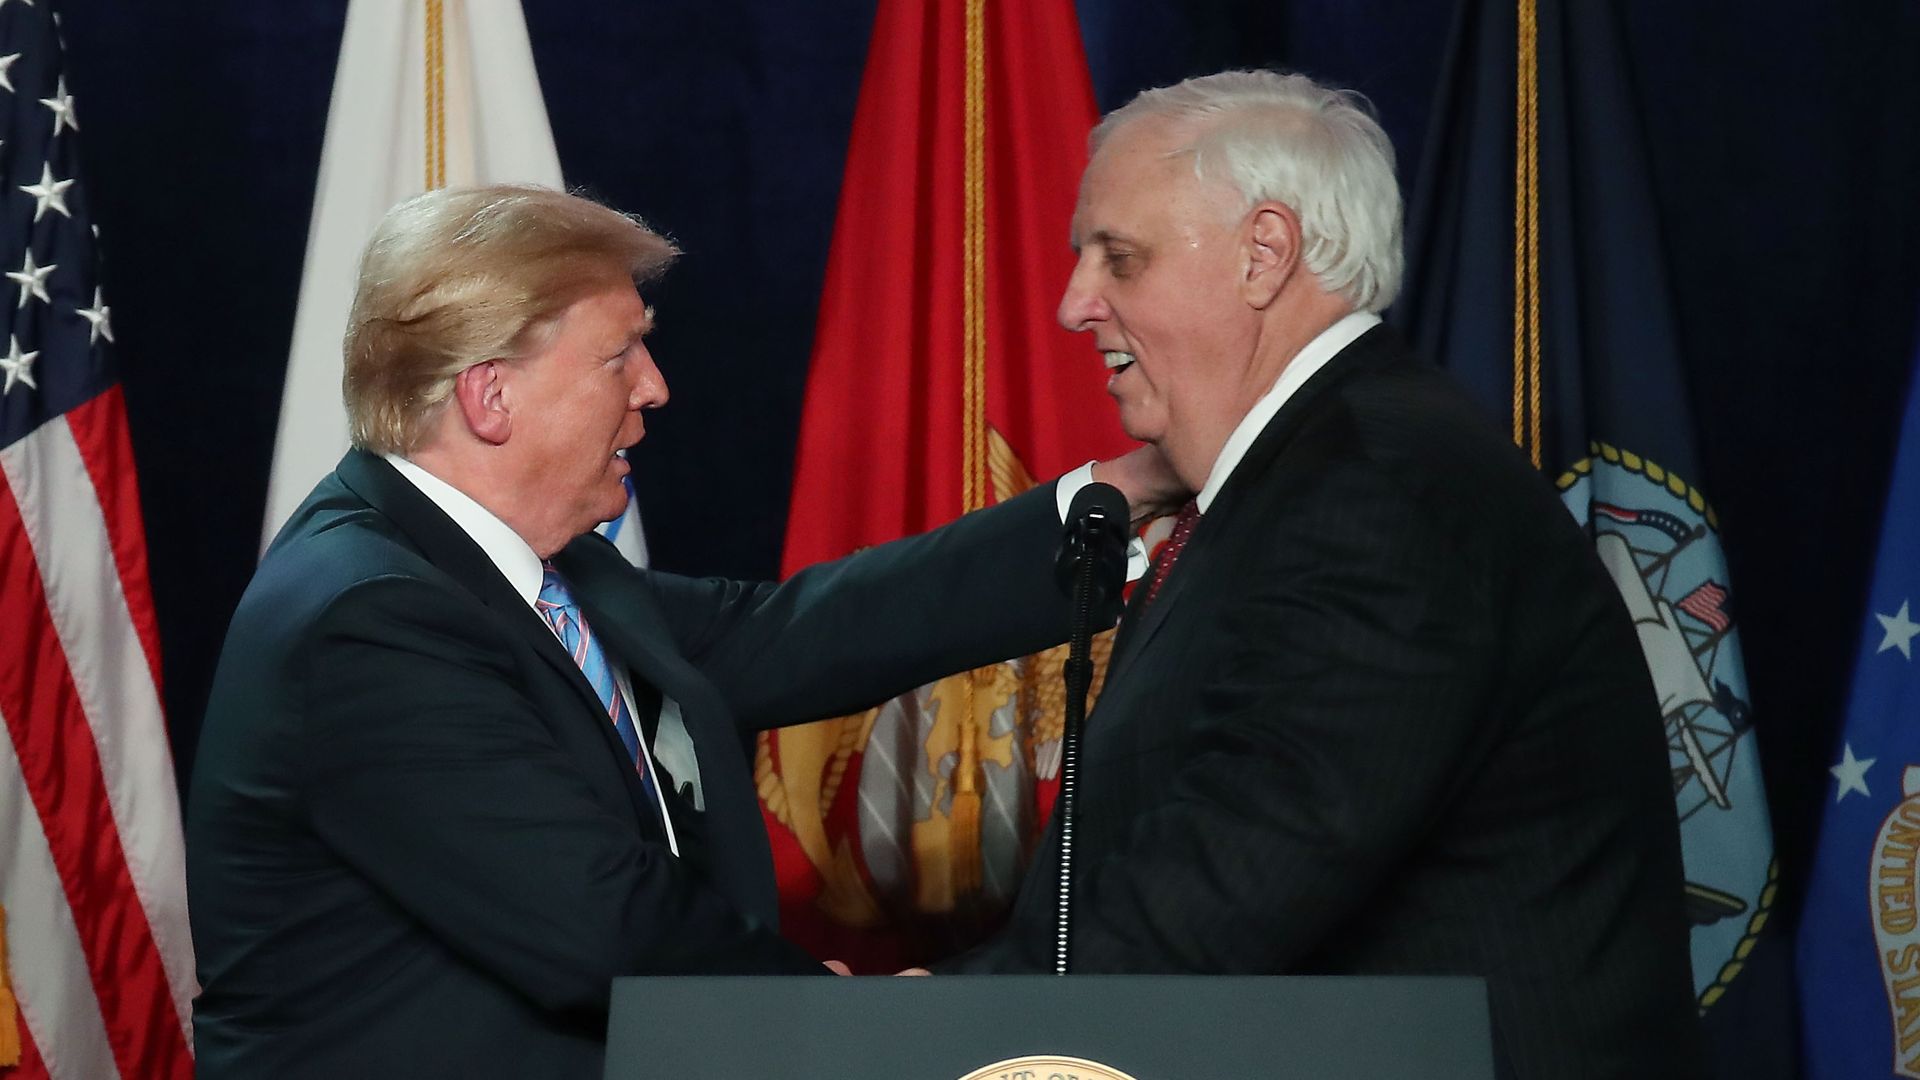 This is a photo of Jim Justice shaking hands with Donald Trump 